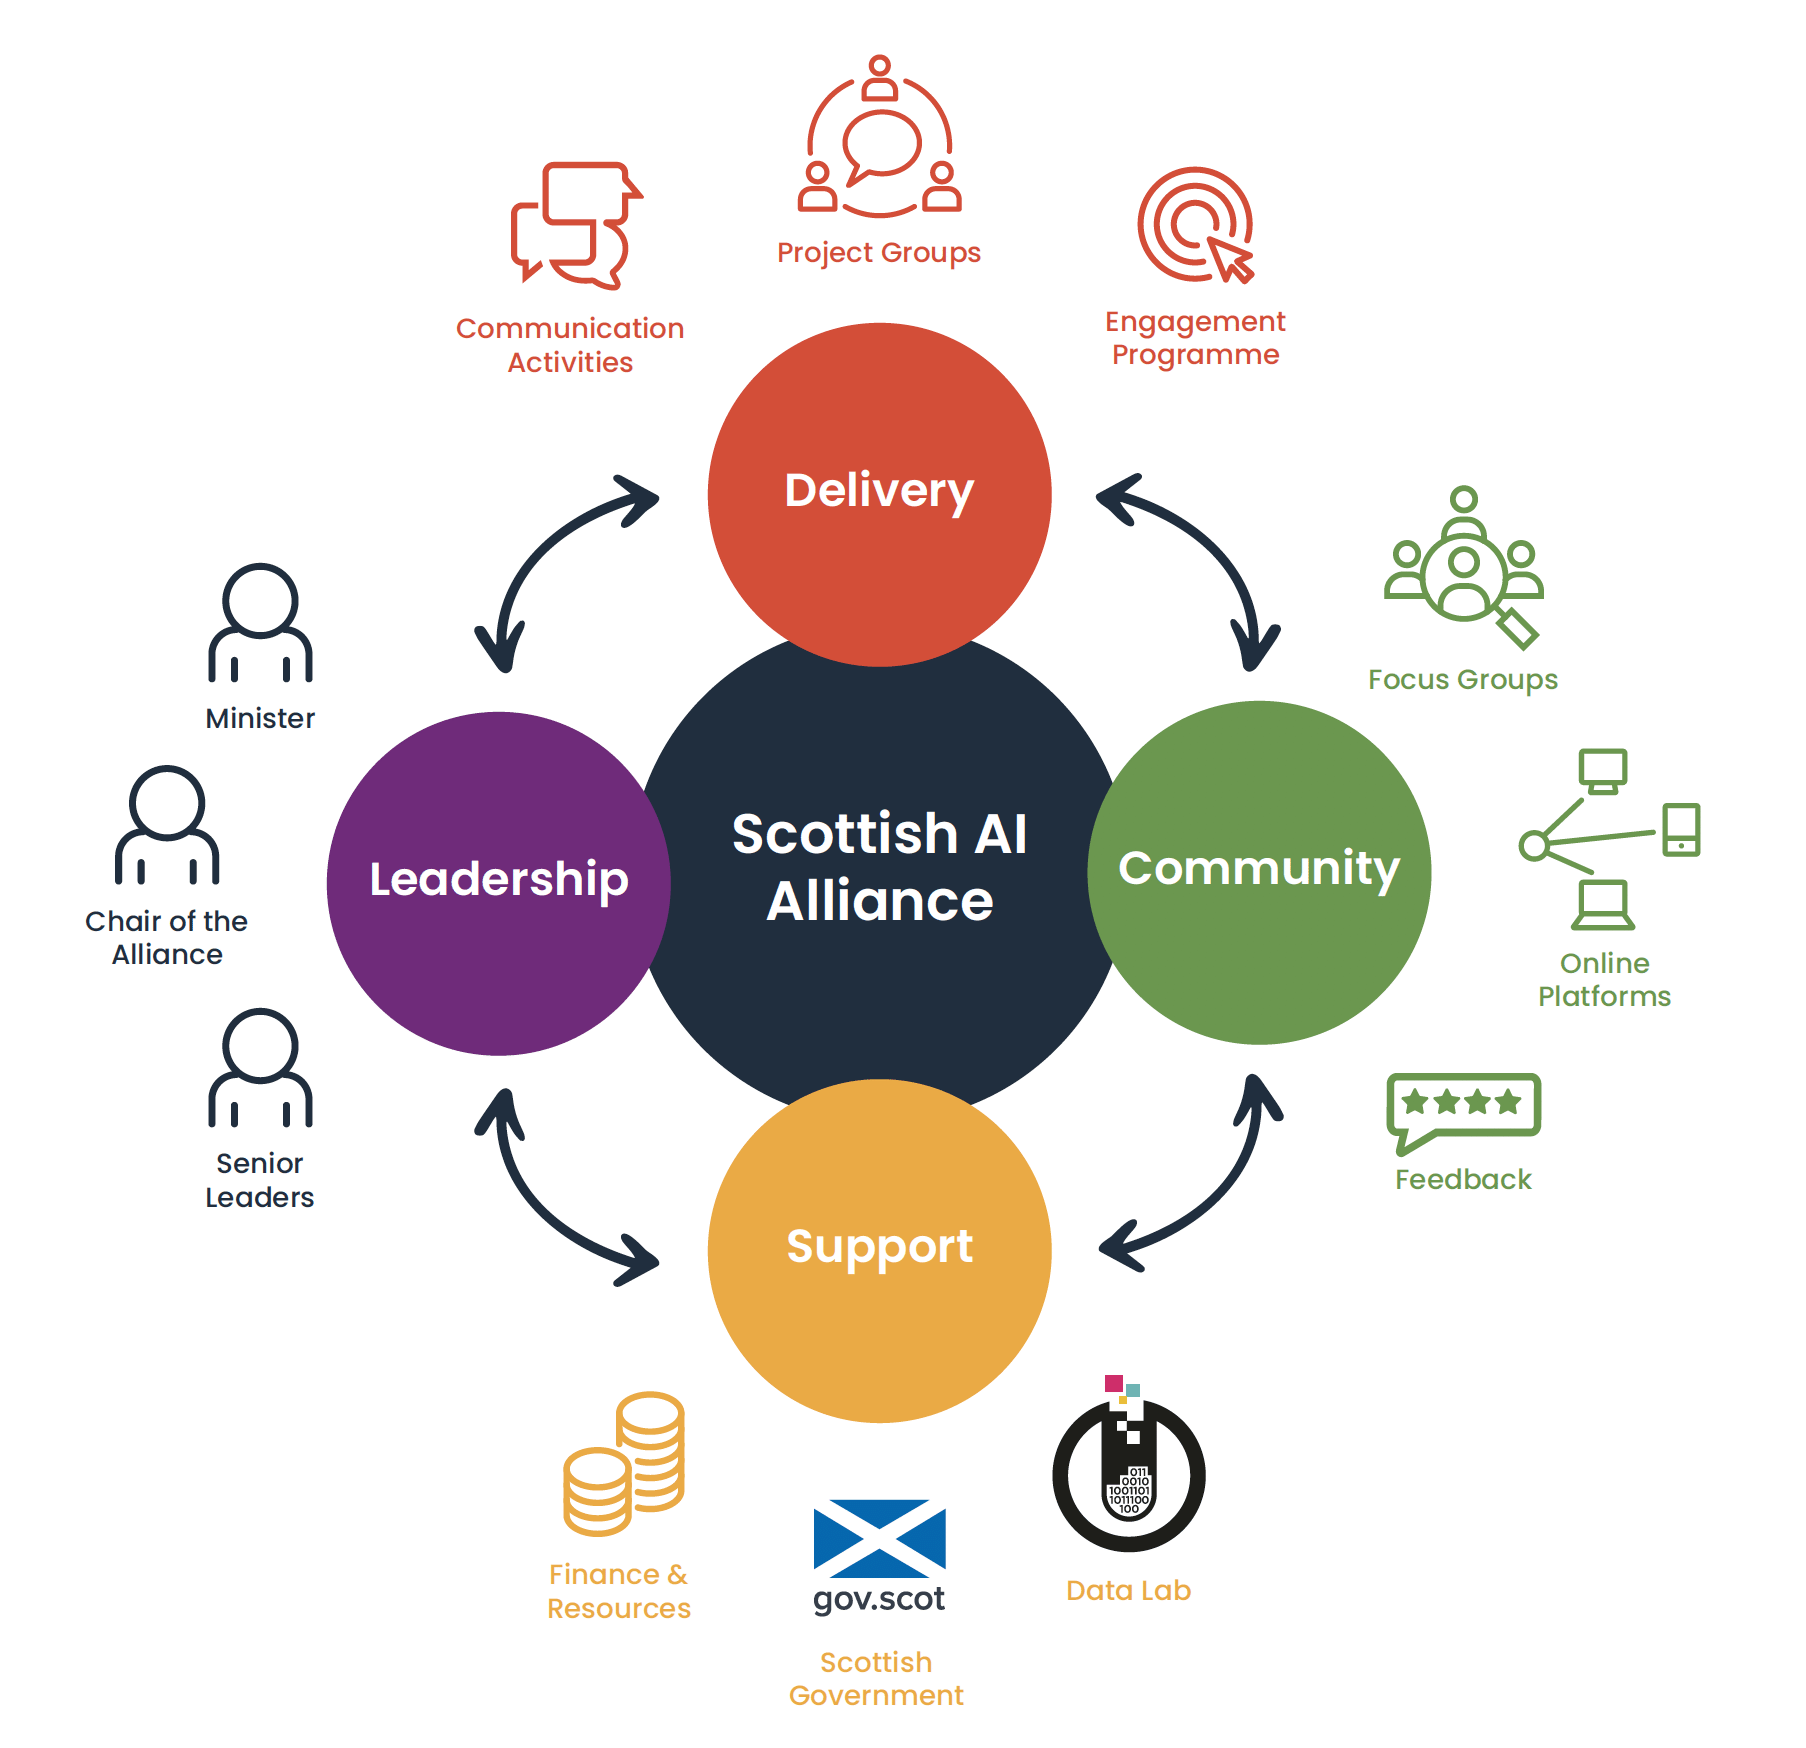 A graphic of the four Circles in the Scottish AI Alliance, summarising what each involves:
Leadership – Minister, Chair of the Alliance, Senior Leaders,
Delivery – Communication Activities, Project Groups, Engagement Programme,
Community – Focus Groups, Online Platforms, Feedback,
Support – Finance & Resources, Scottish Government, Data Lab
